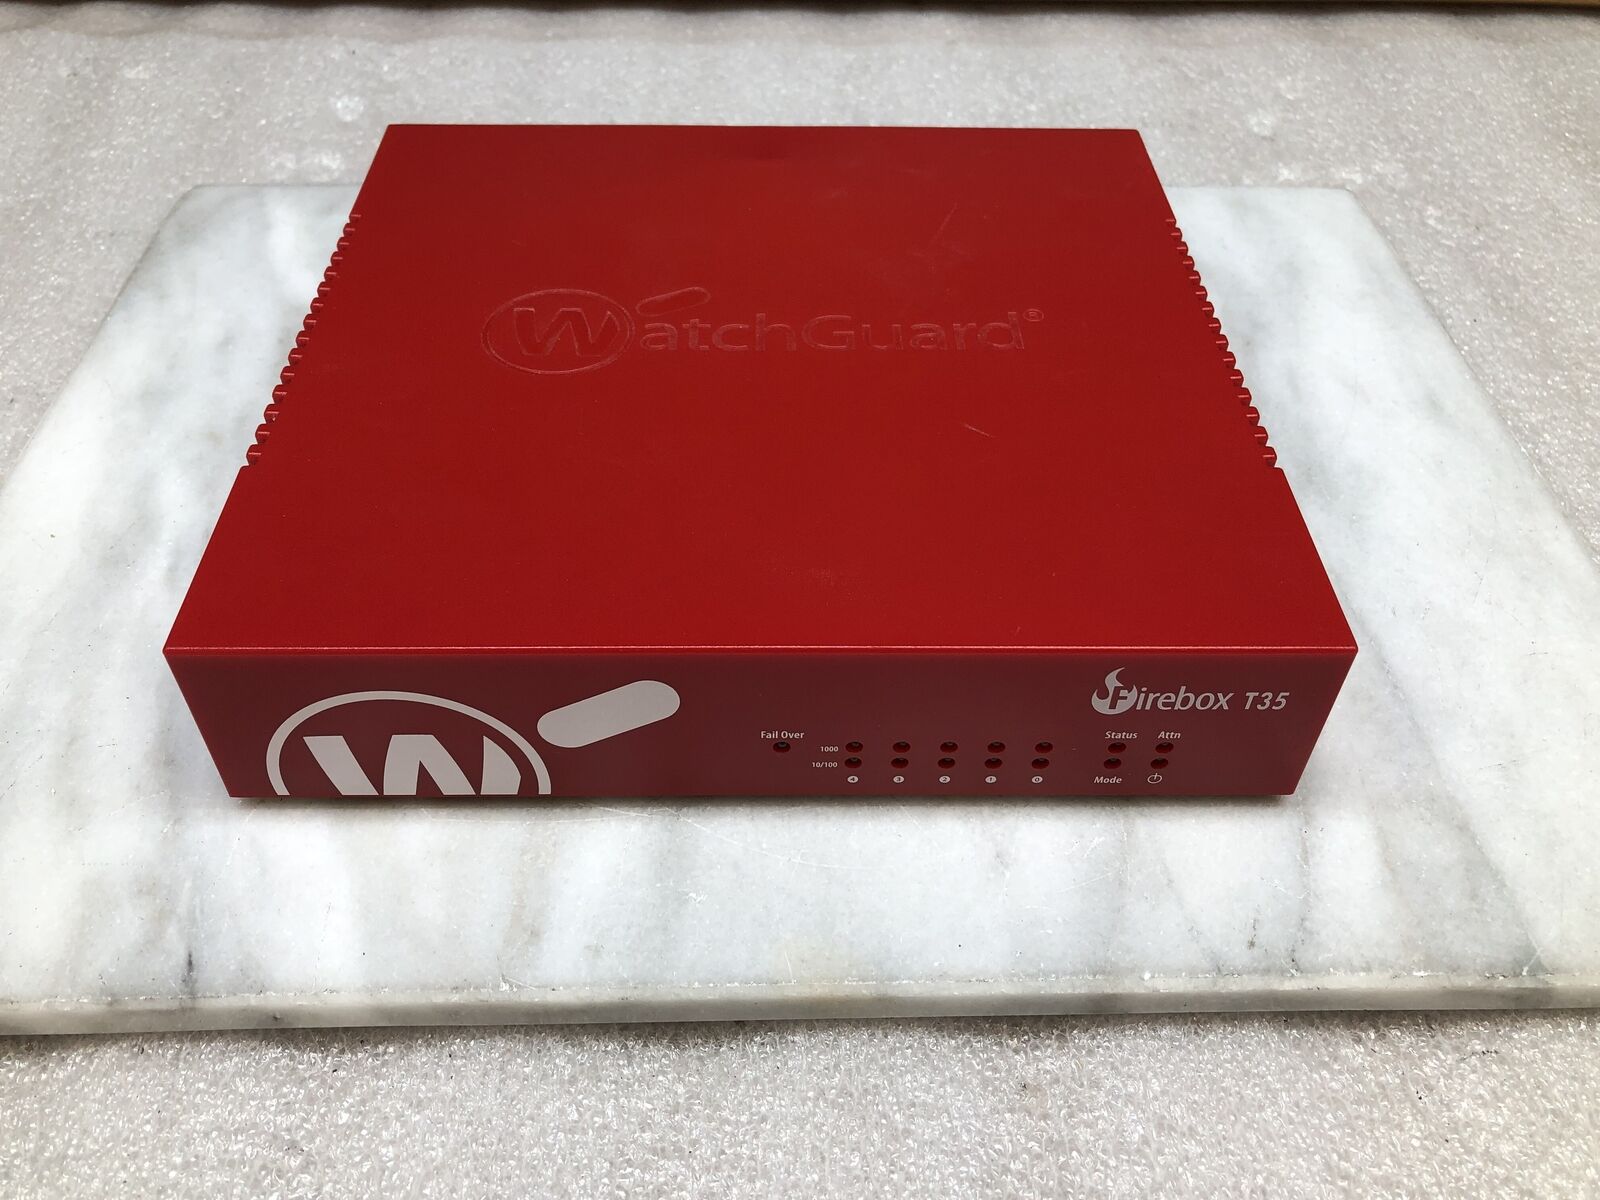 Watchguard Firebox T35 MS3AE5 Network Security Firewall Appliance TESTED RESET